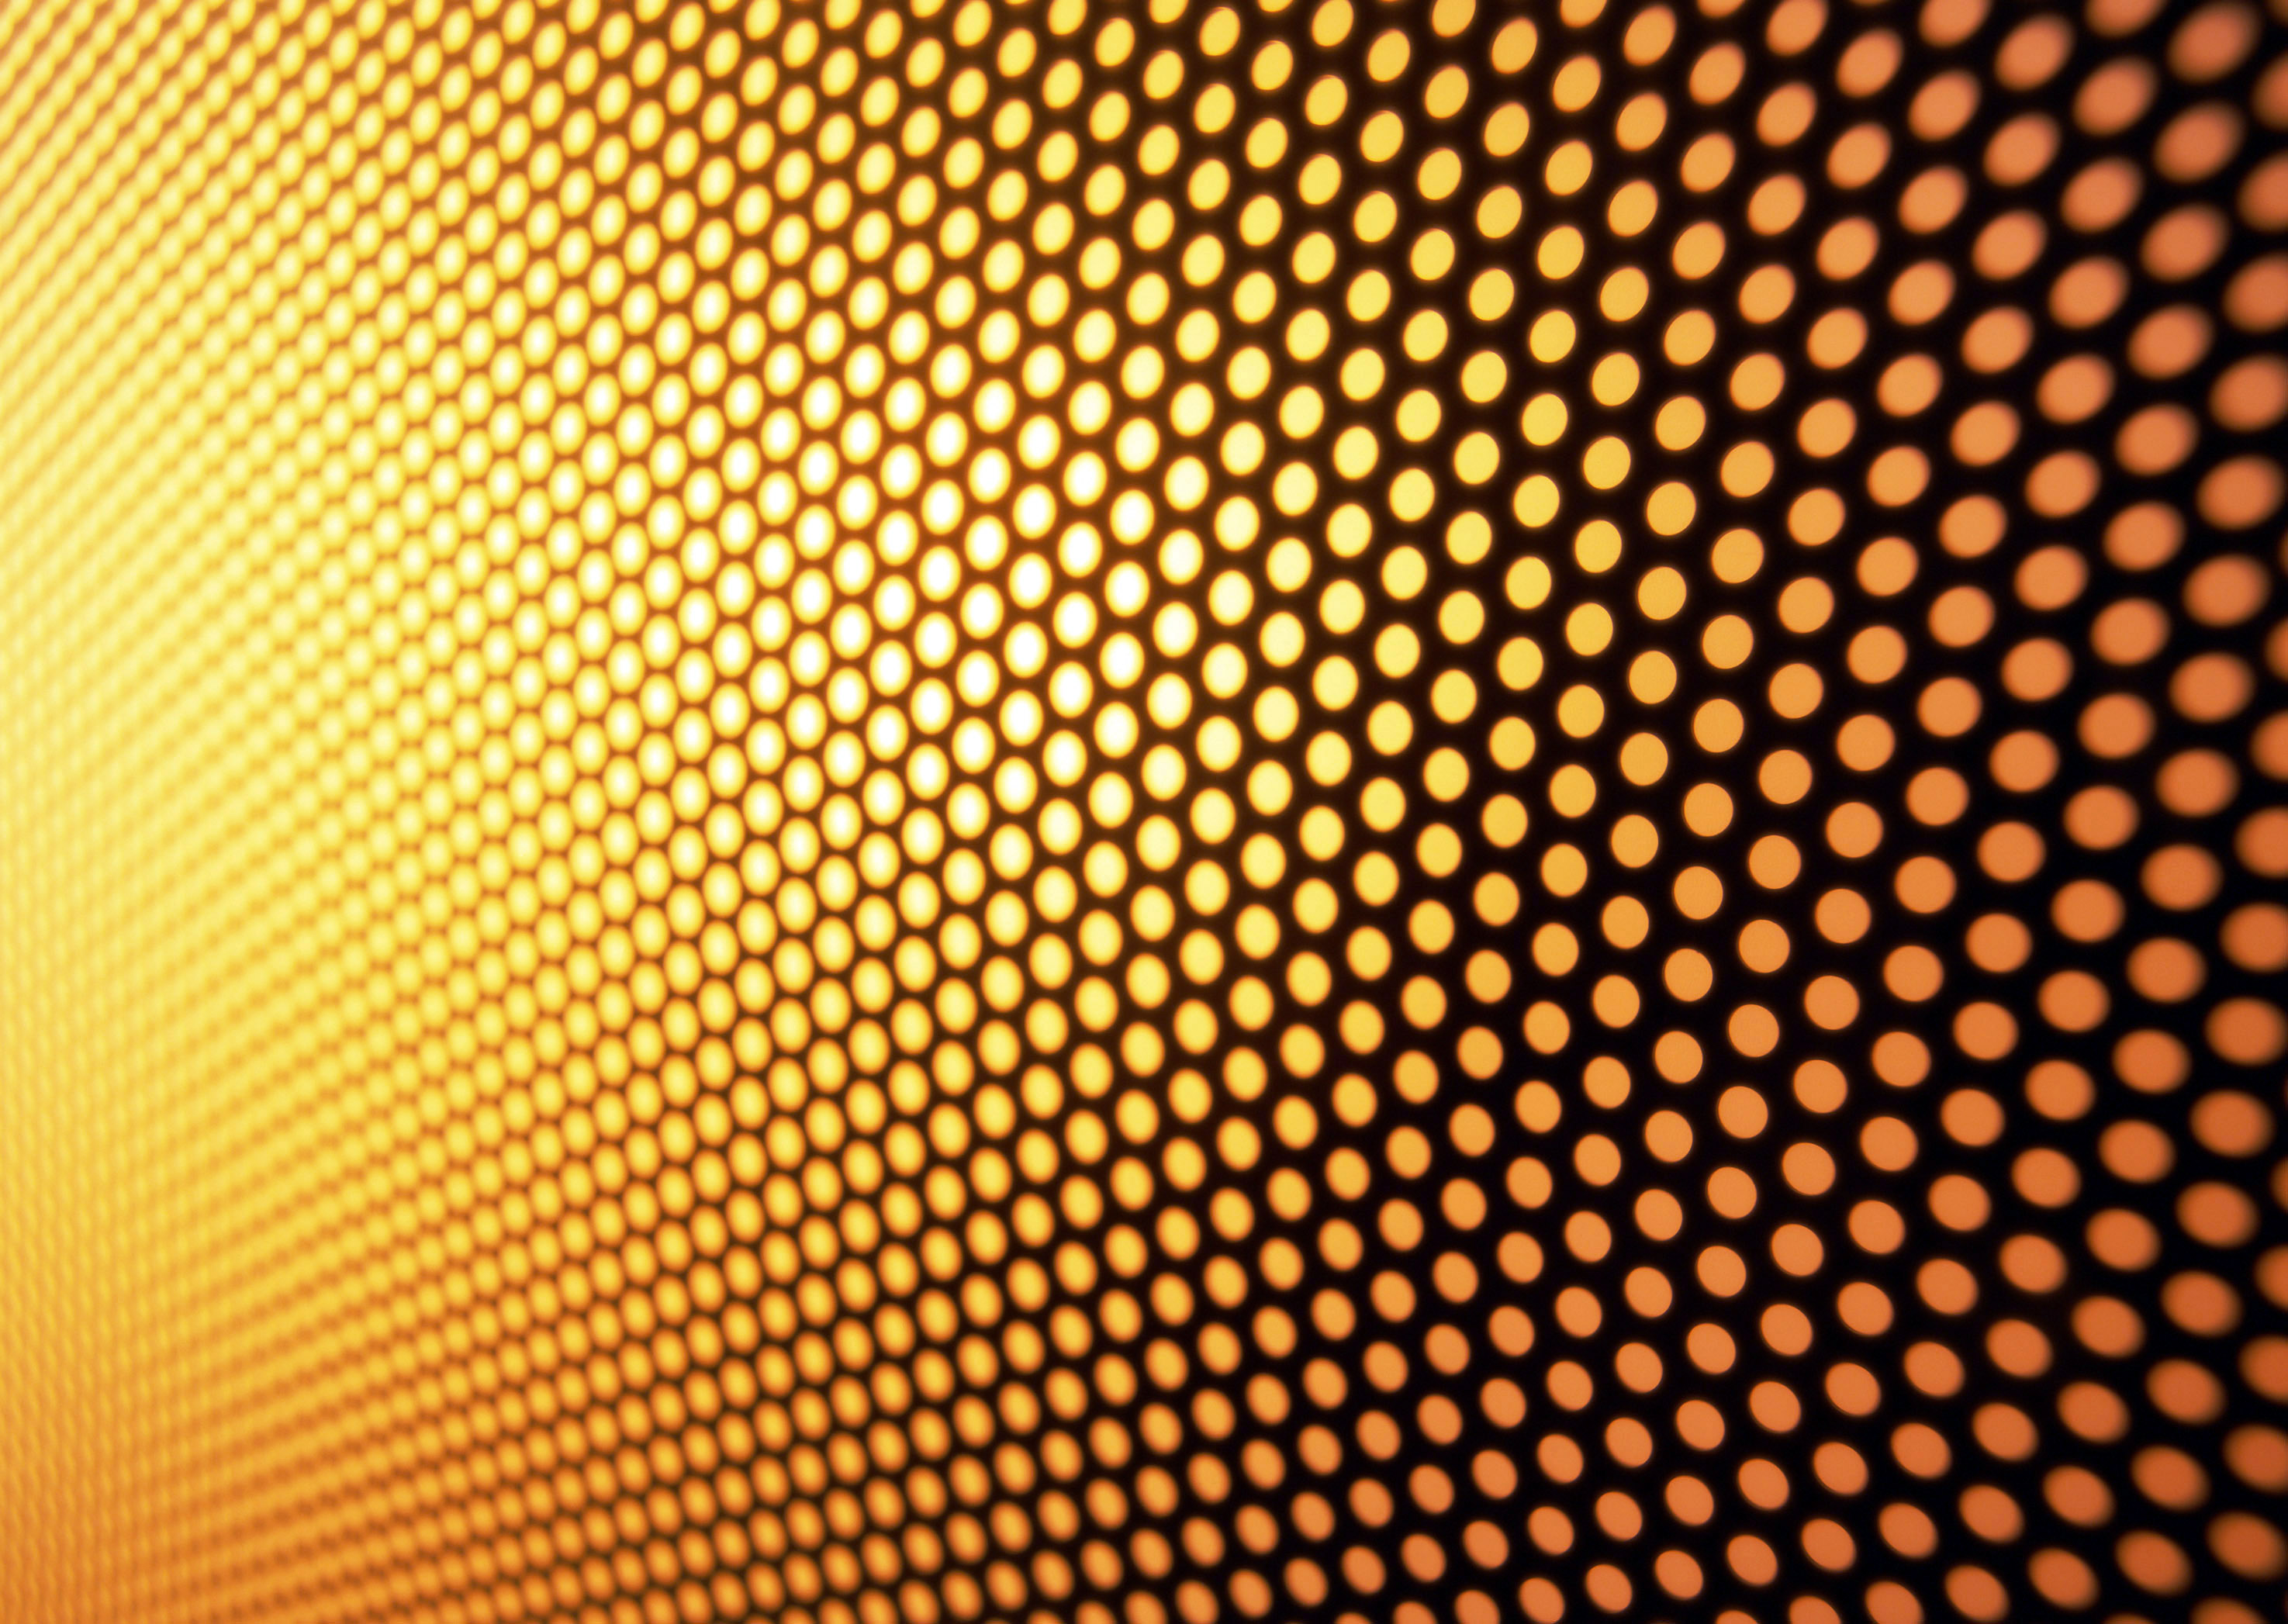 Gold And Black Background Design Hd - HD Wallpaper 